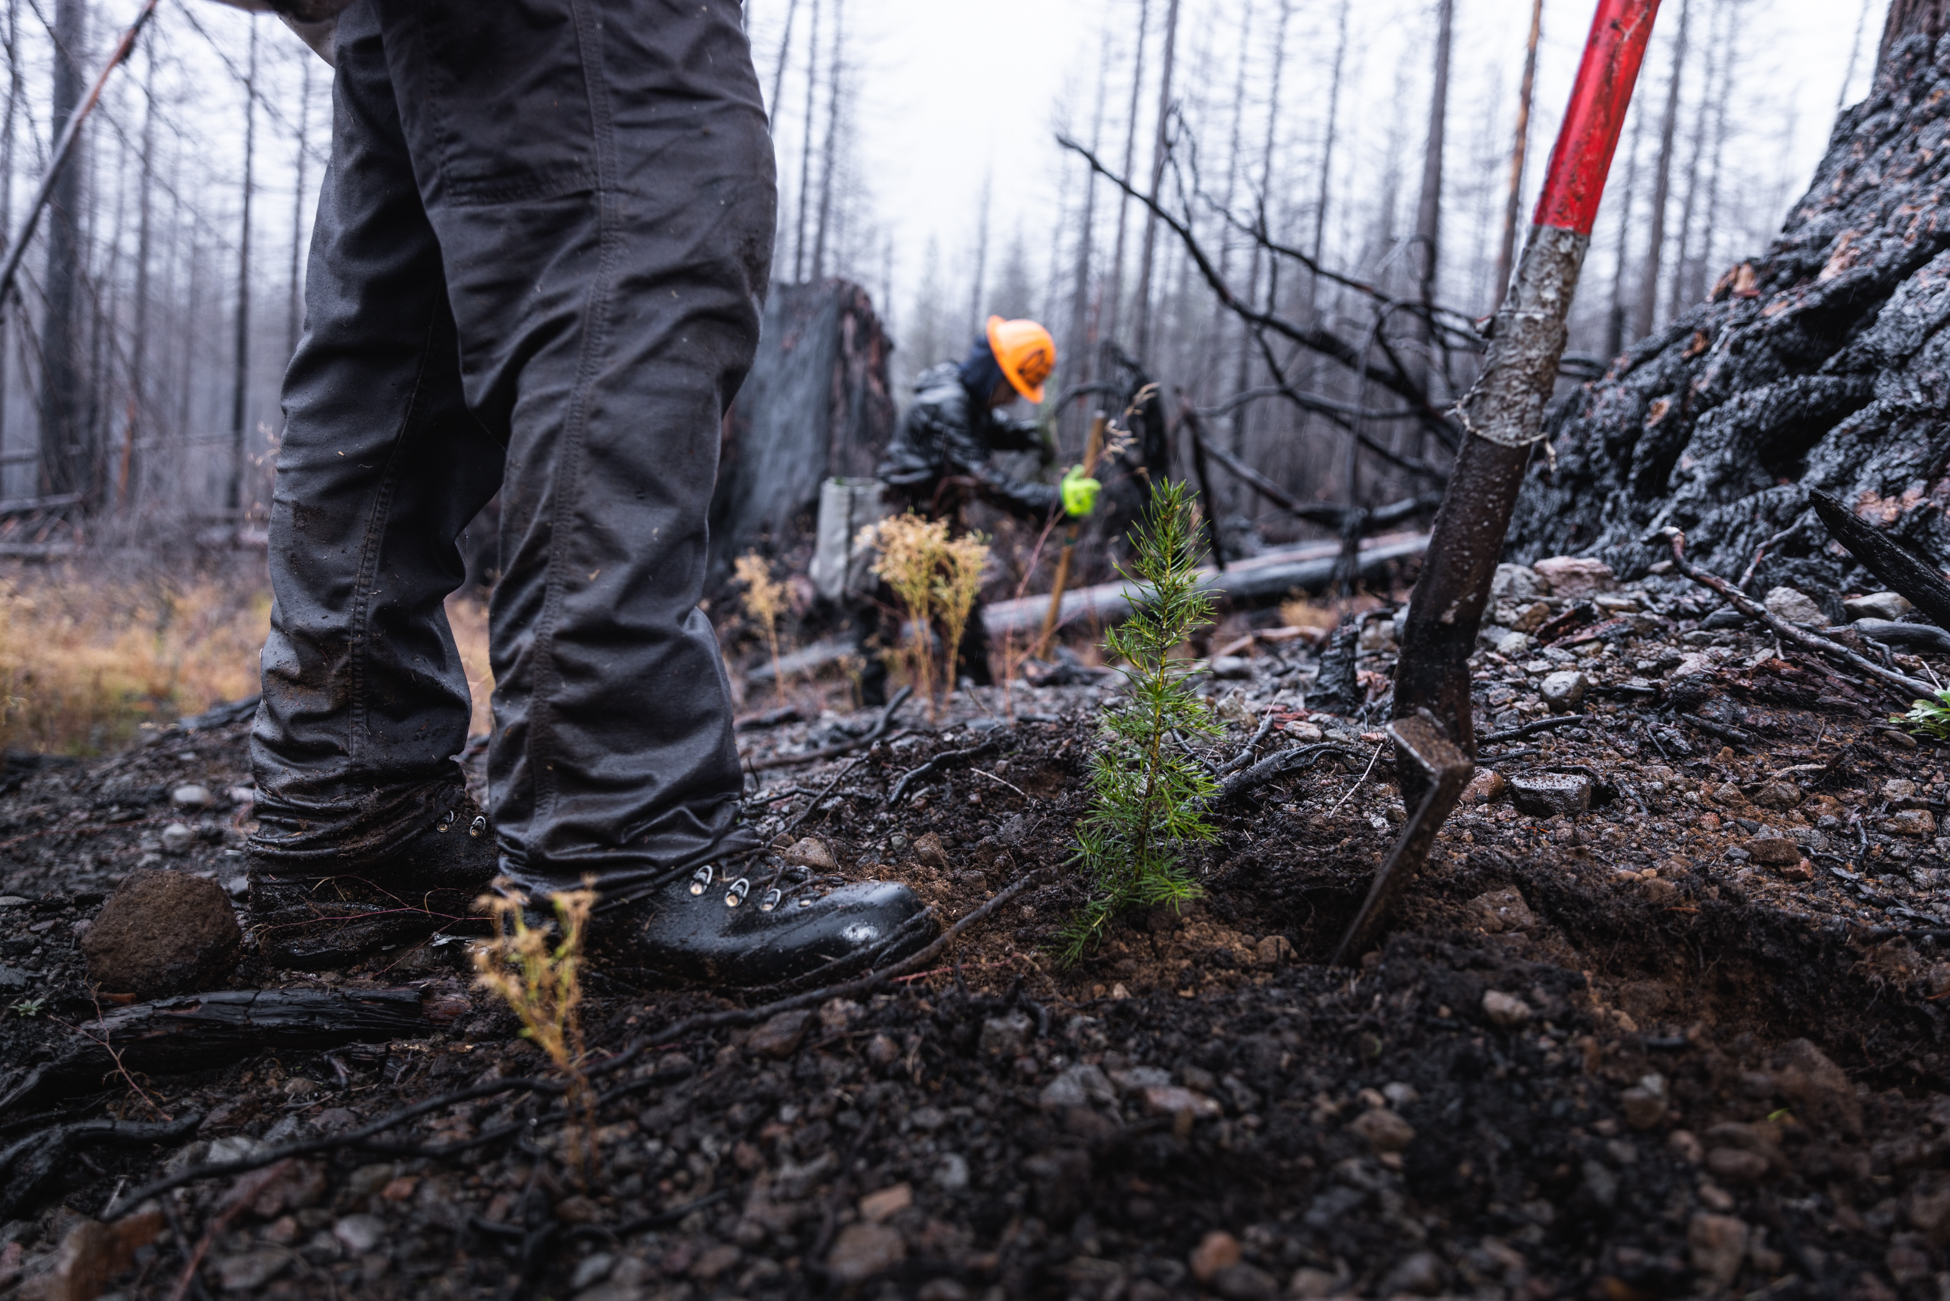 Photography of tree planters replanting douglas fir saplings in Oregon's Santiam State Forest after the Beachie Creek Fire of 2020. Shot on assignment for American Forests™